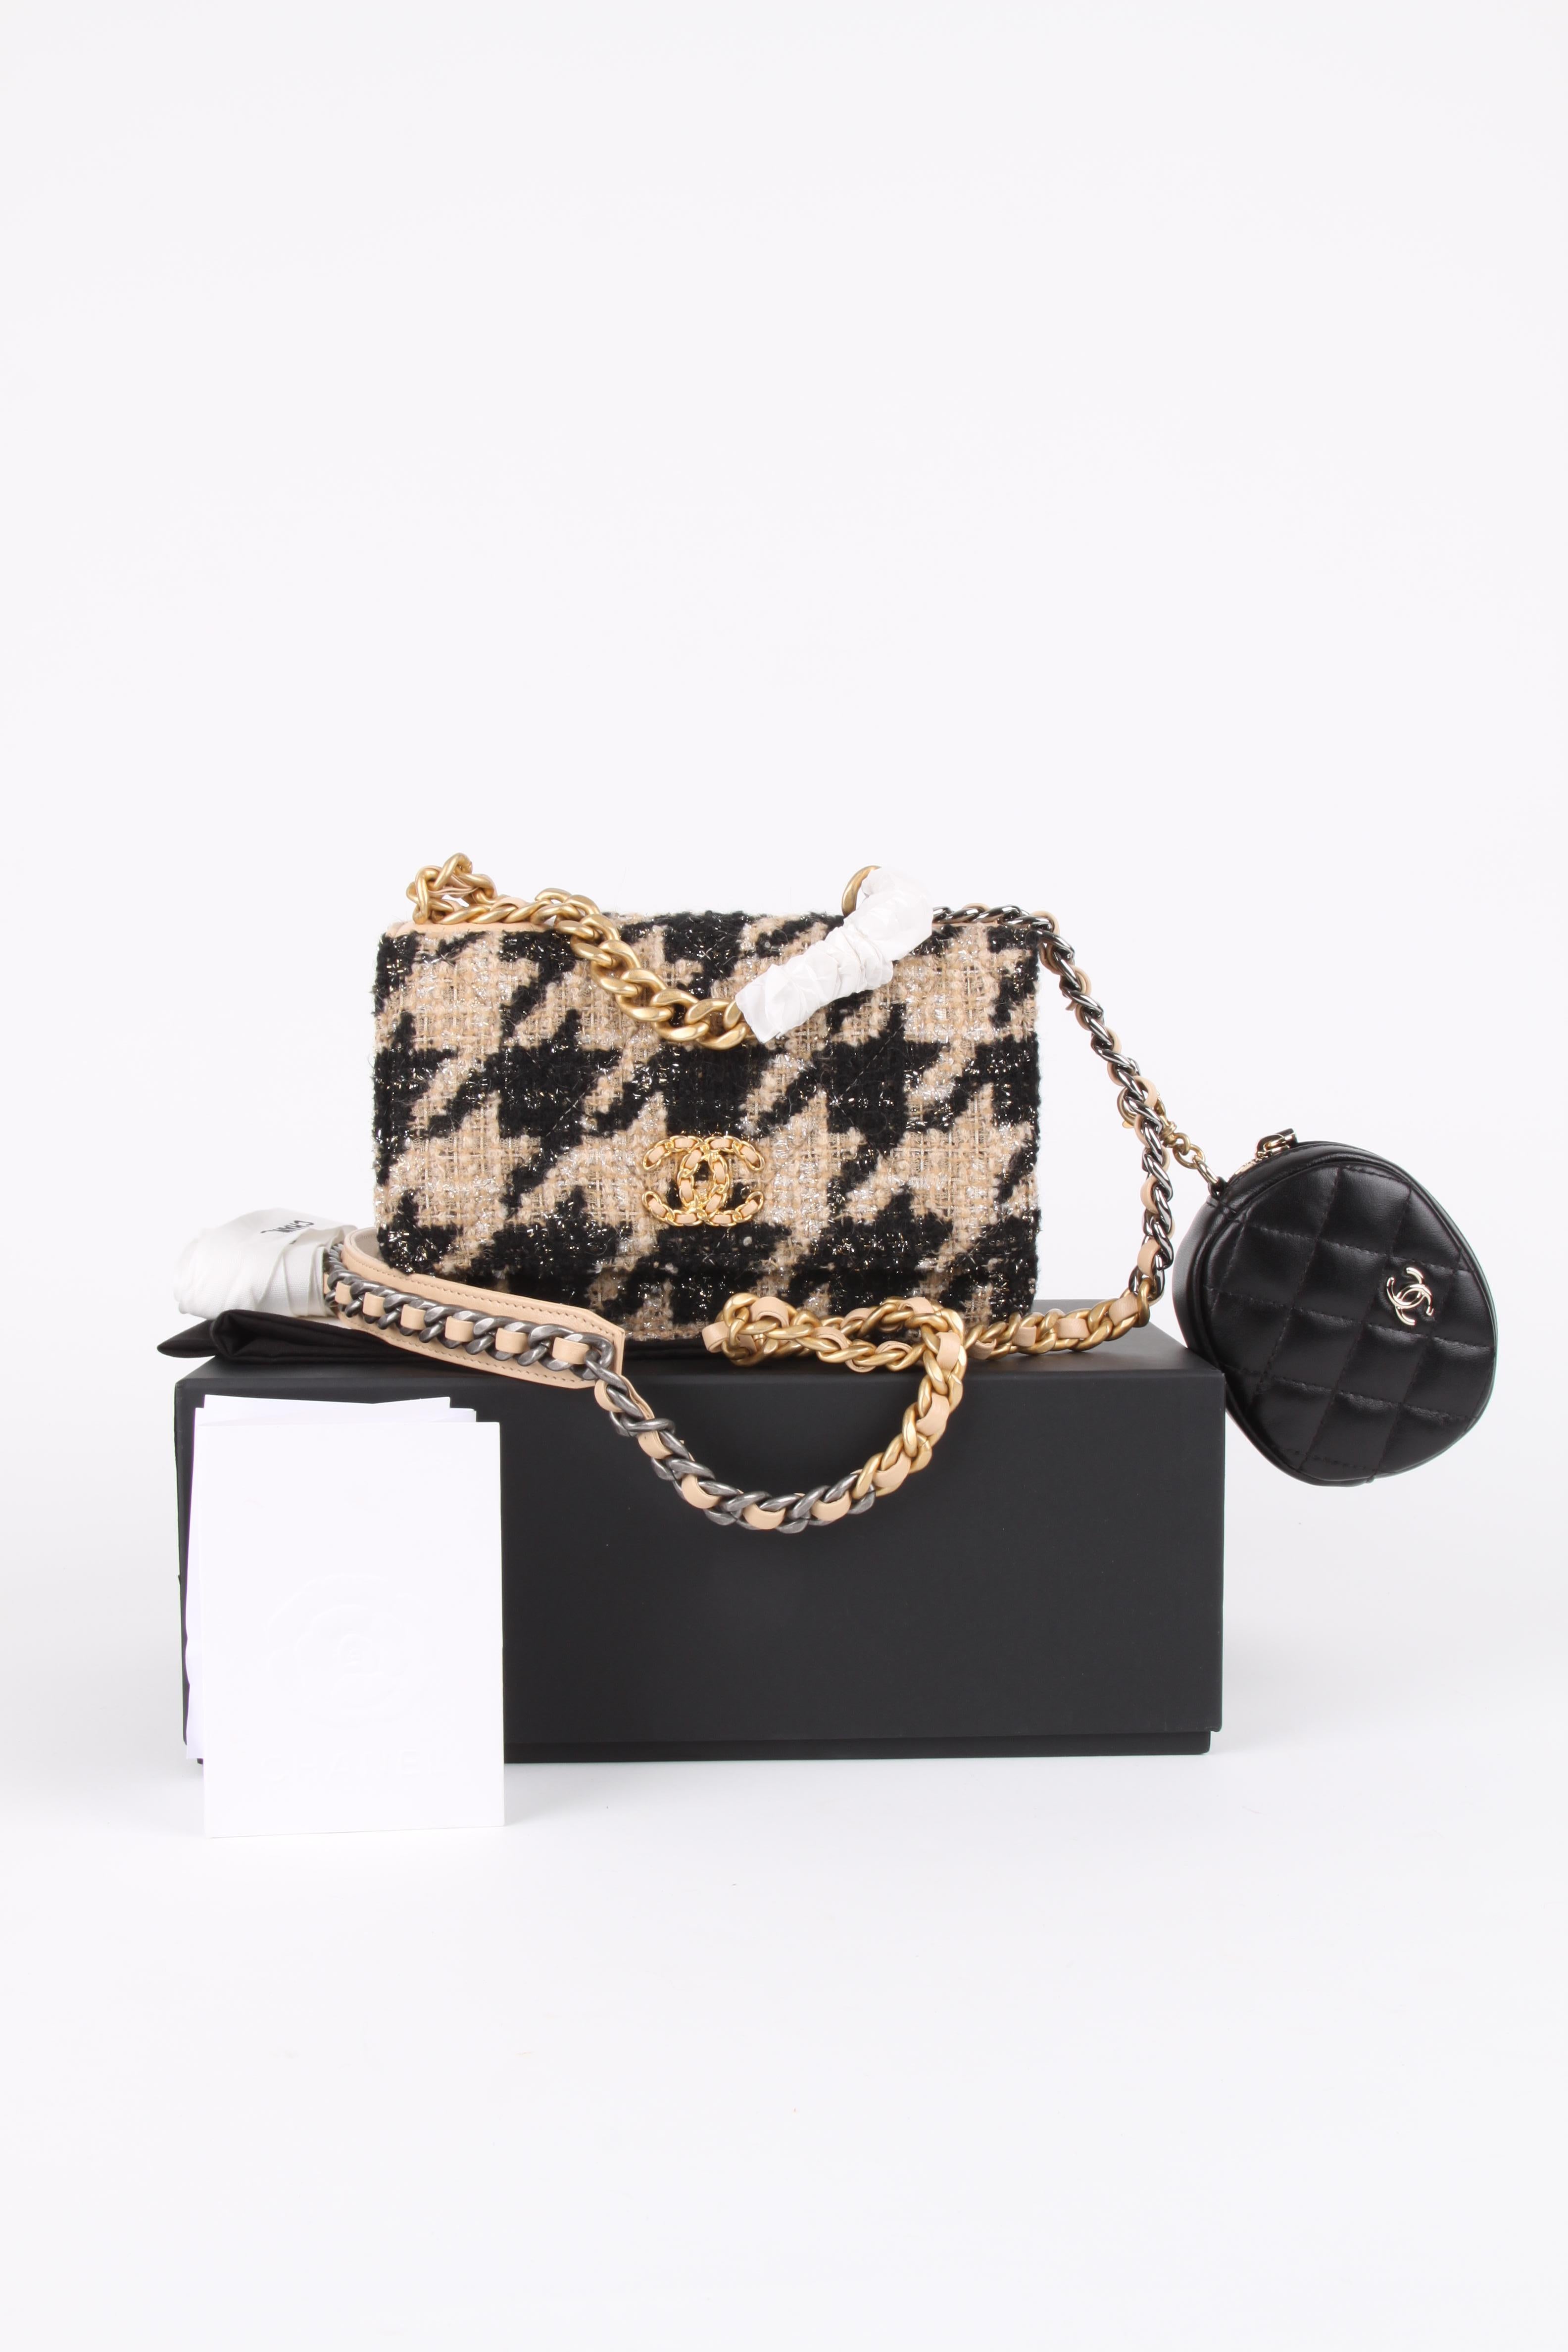 Chanel Fall/Winter 2019/2020 tweed black brown houndstooth mini flap  6